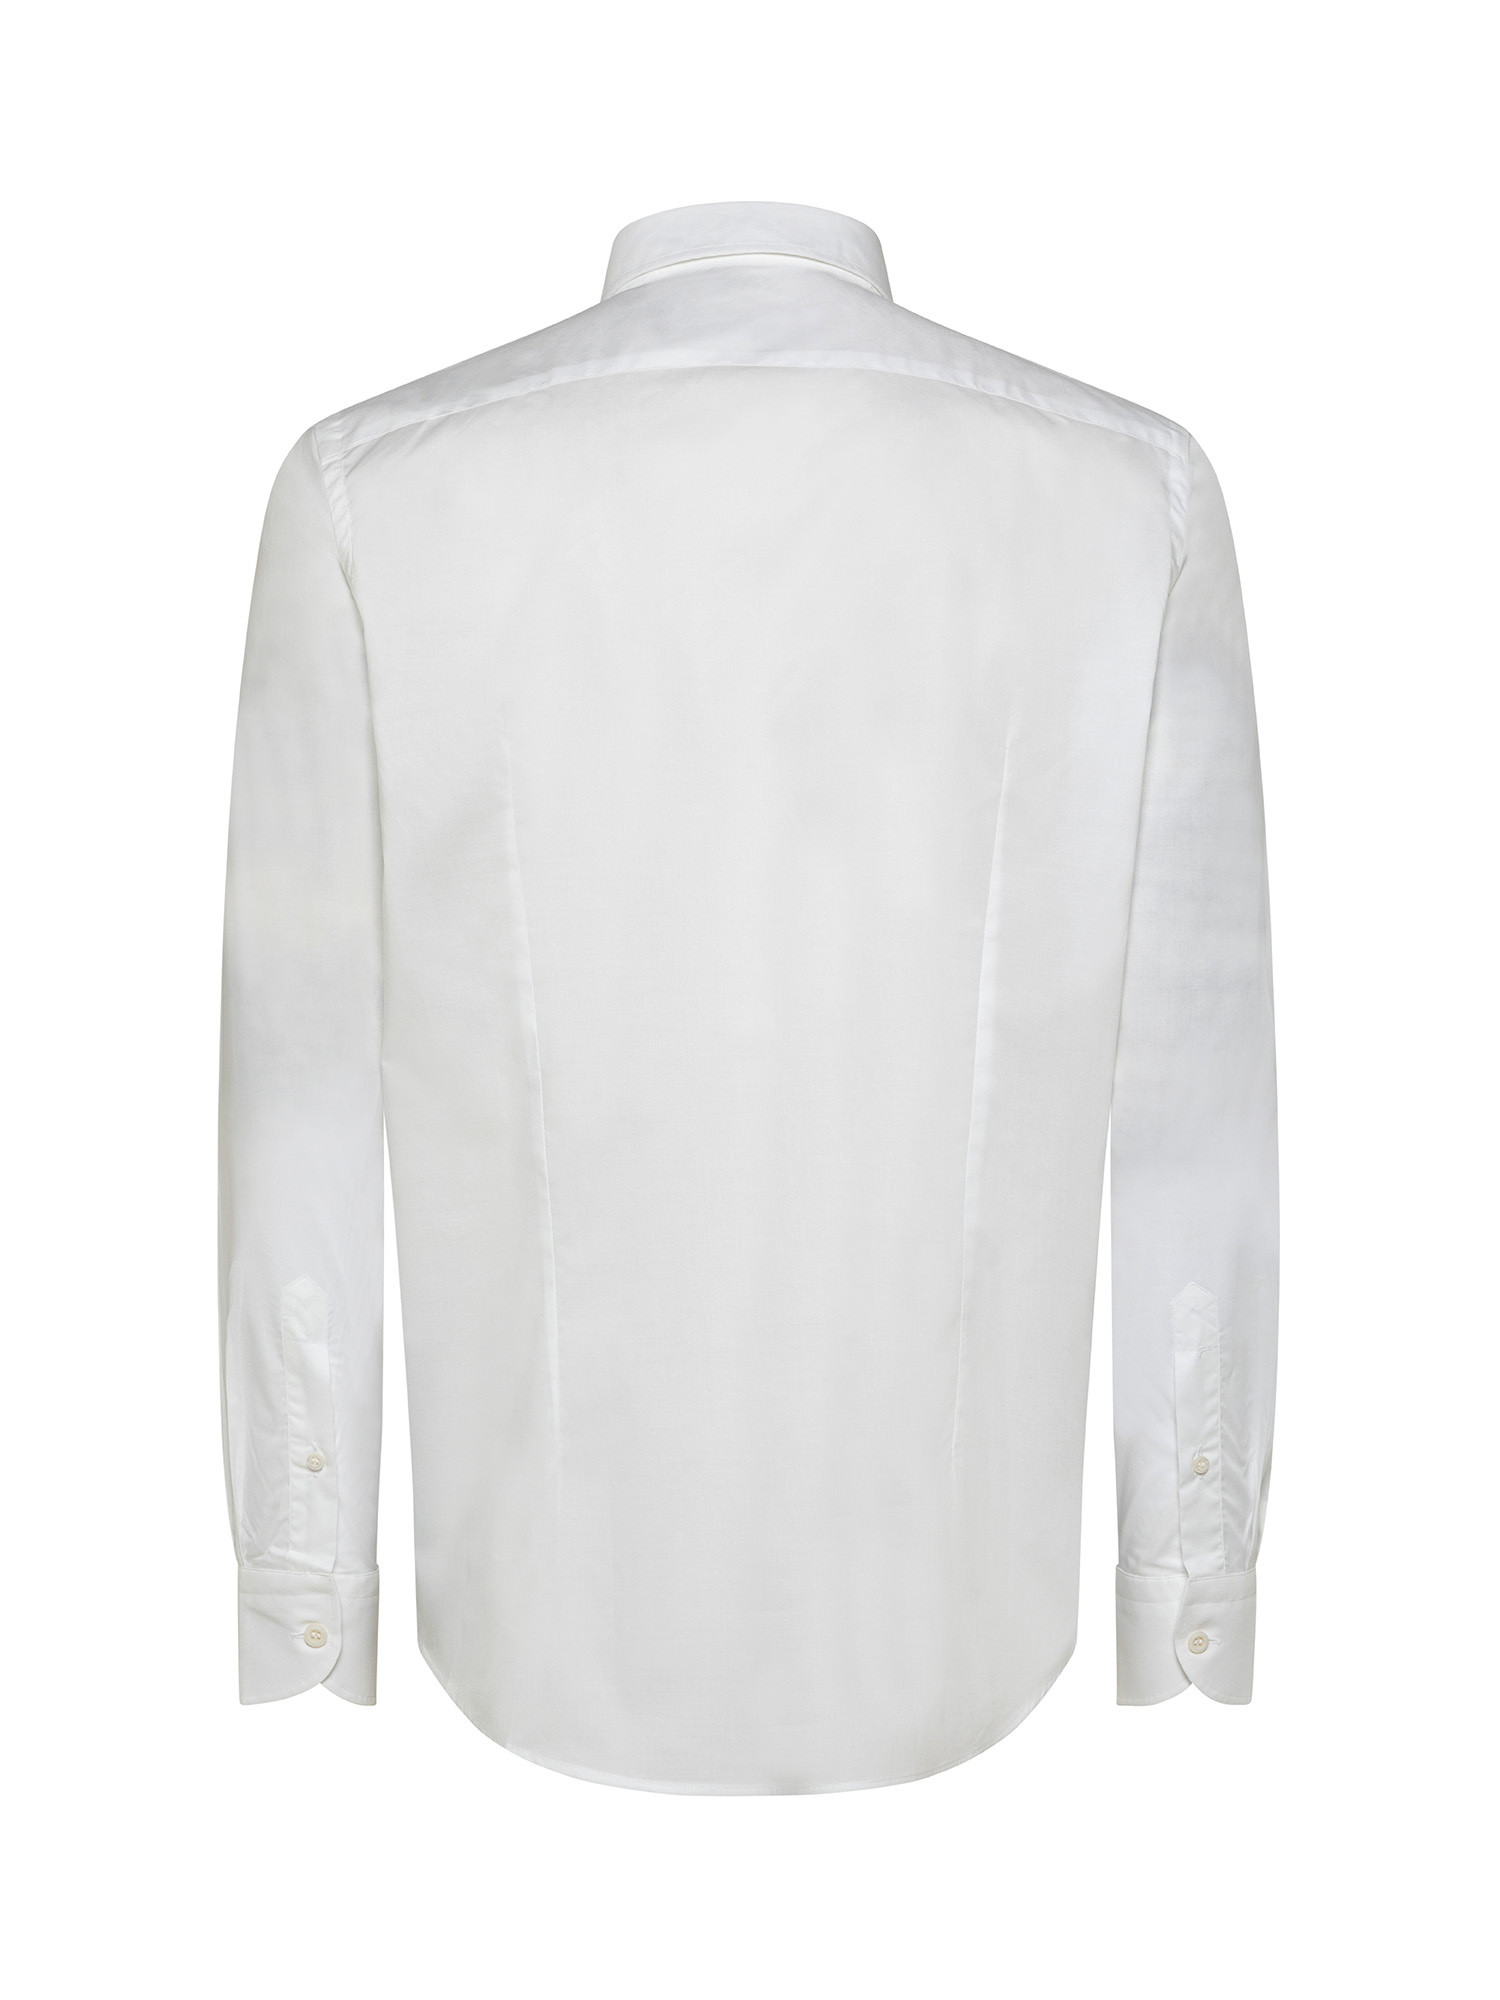 Slim fit shirt in stretch cotton, White, large image number 2